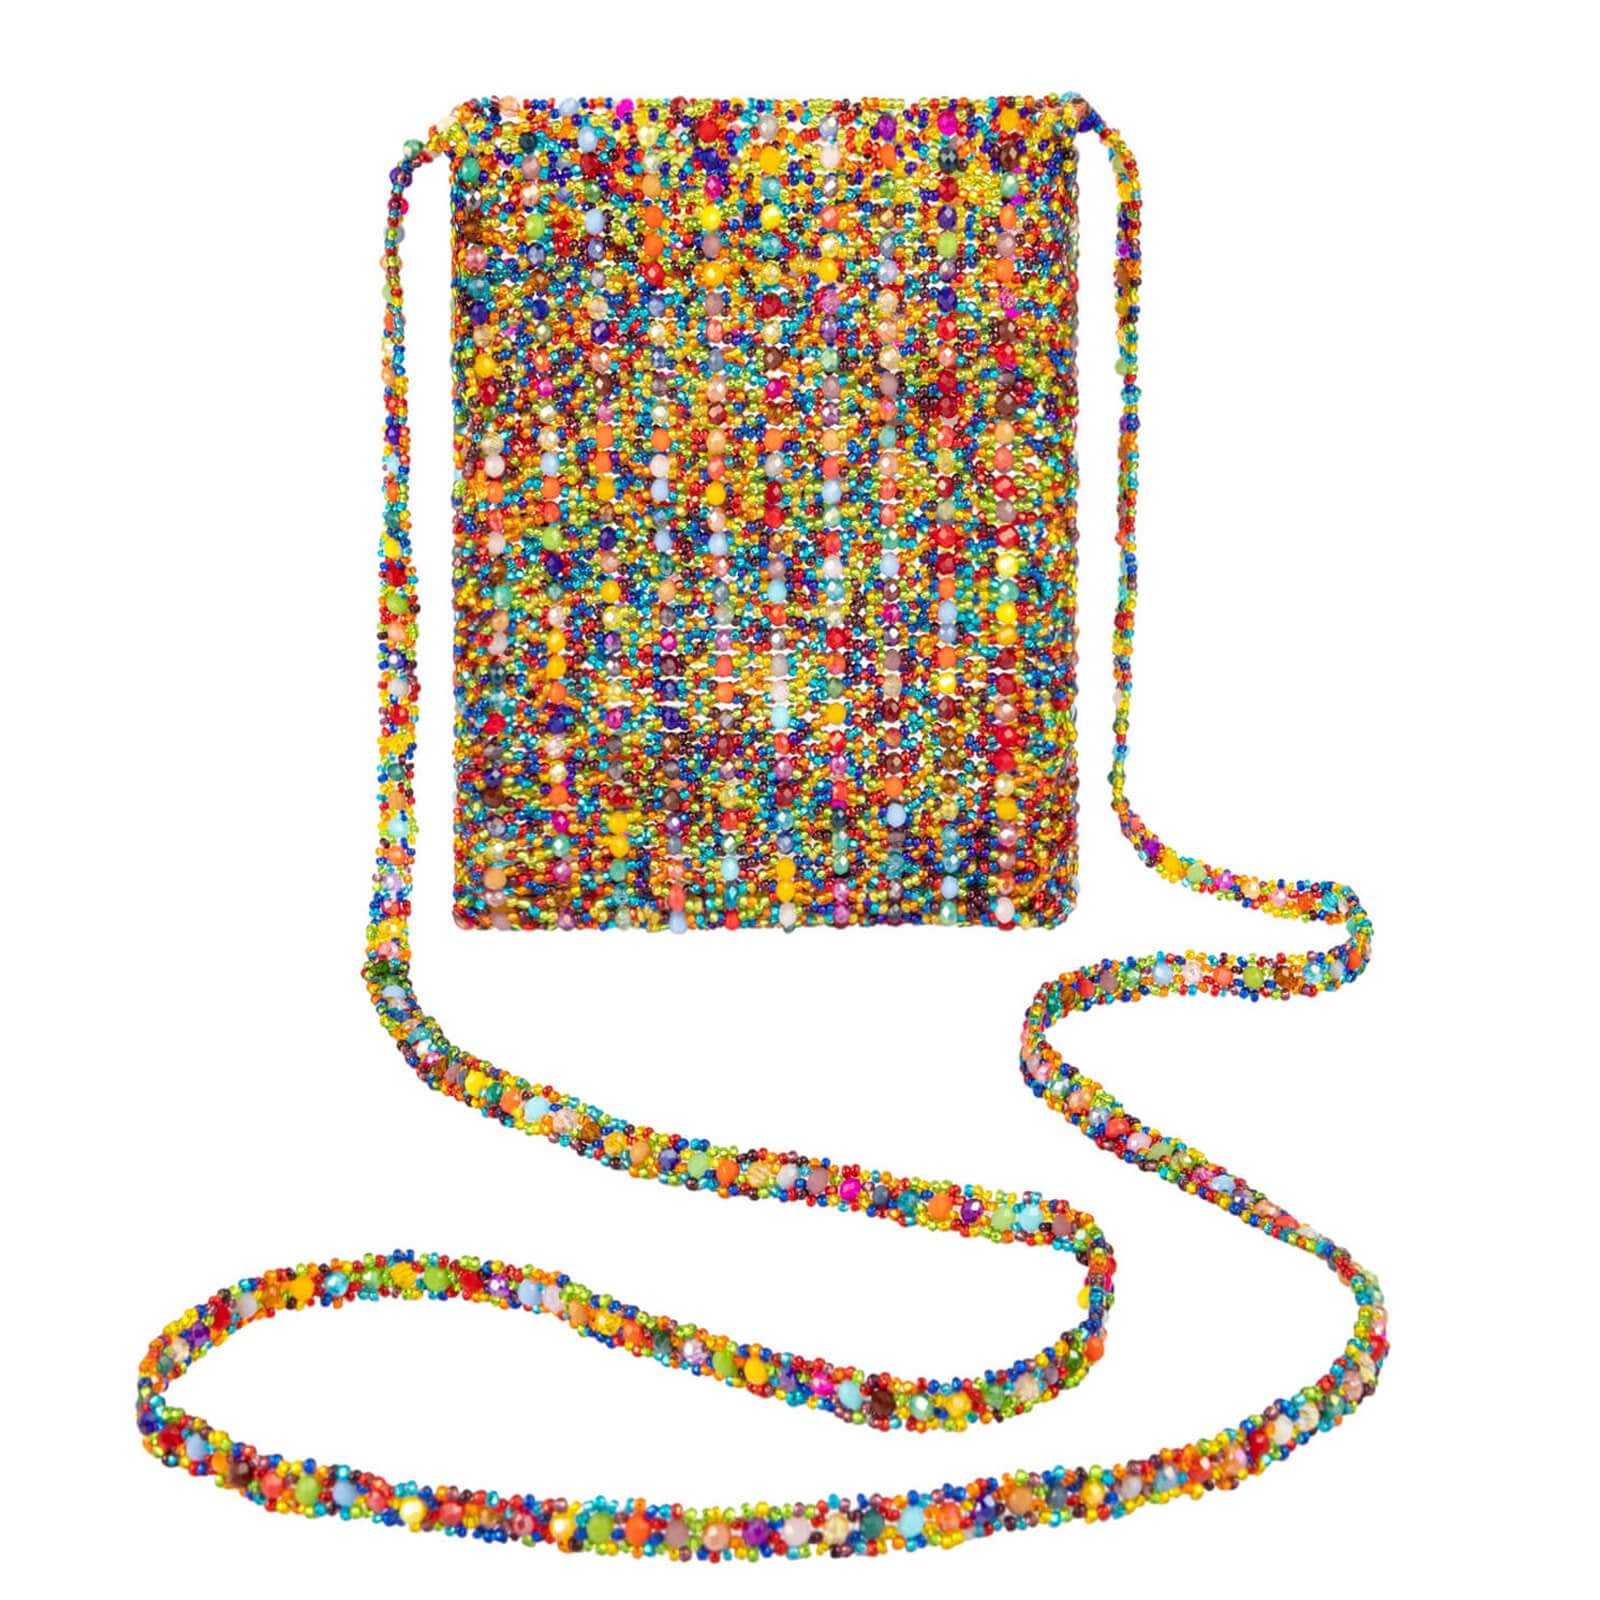 XÚRAVE COLORIN CELL PHONE BAG – Mexycandi